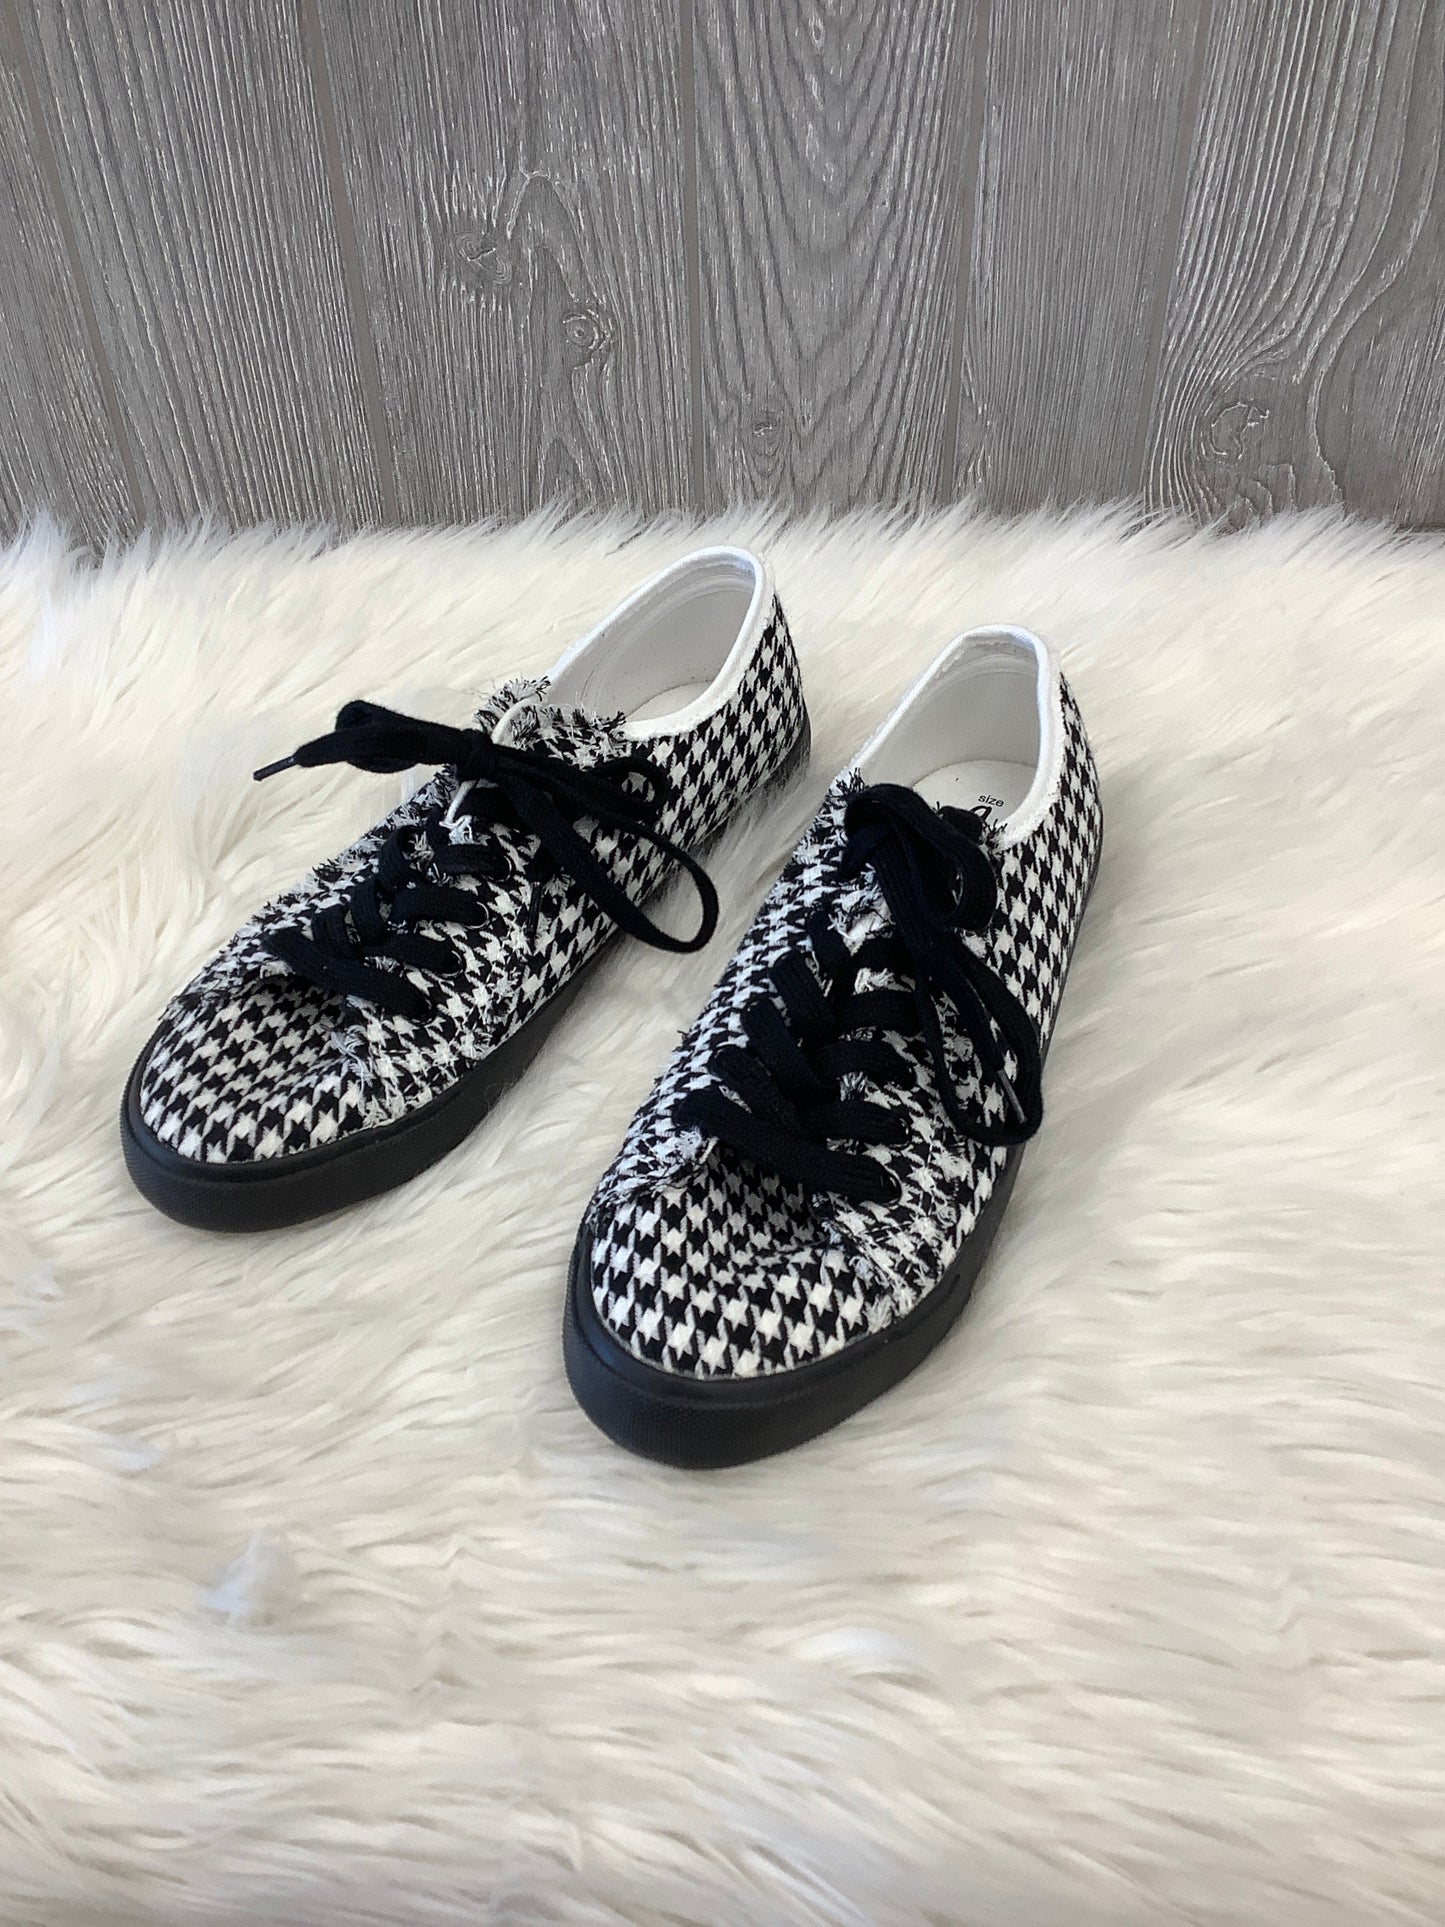 Black & White Shoes Sneakers Charlie Paige, Size 9